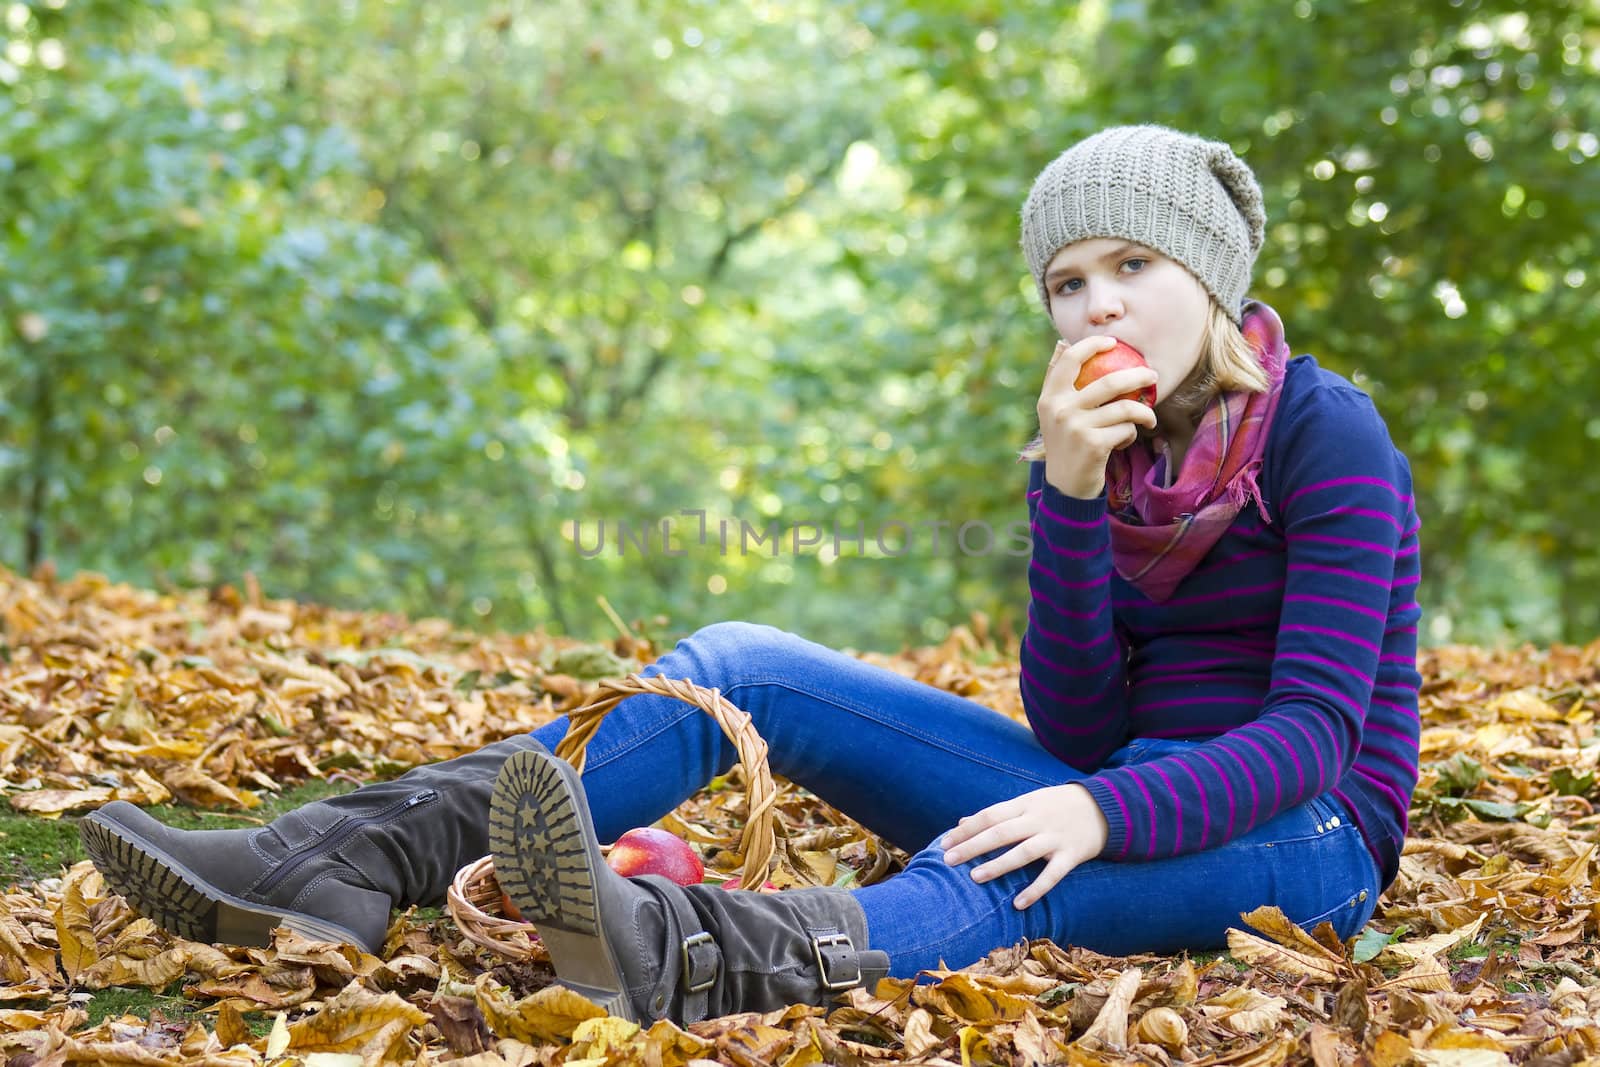 young girl eating red apple in autumn garden